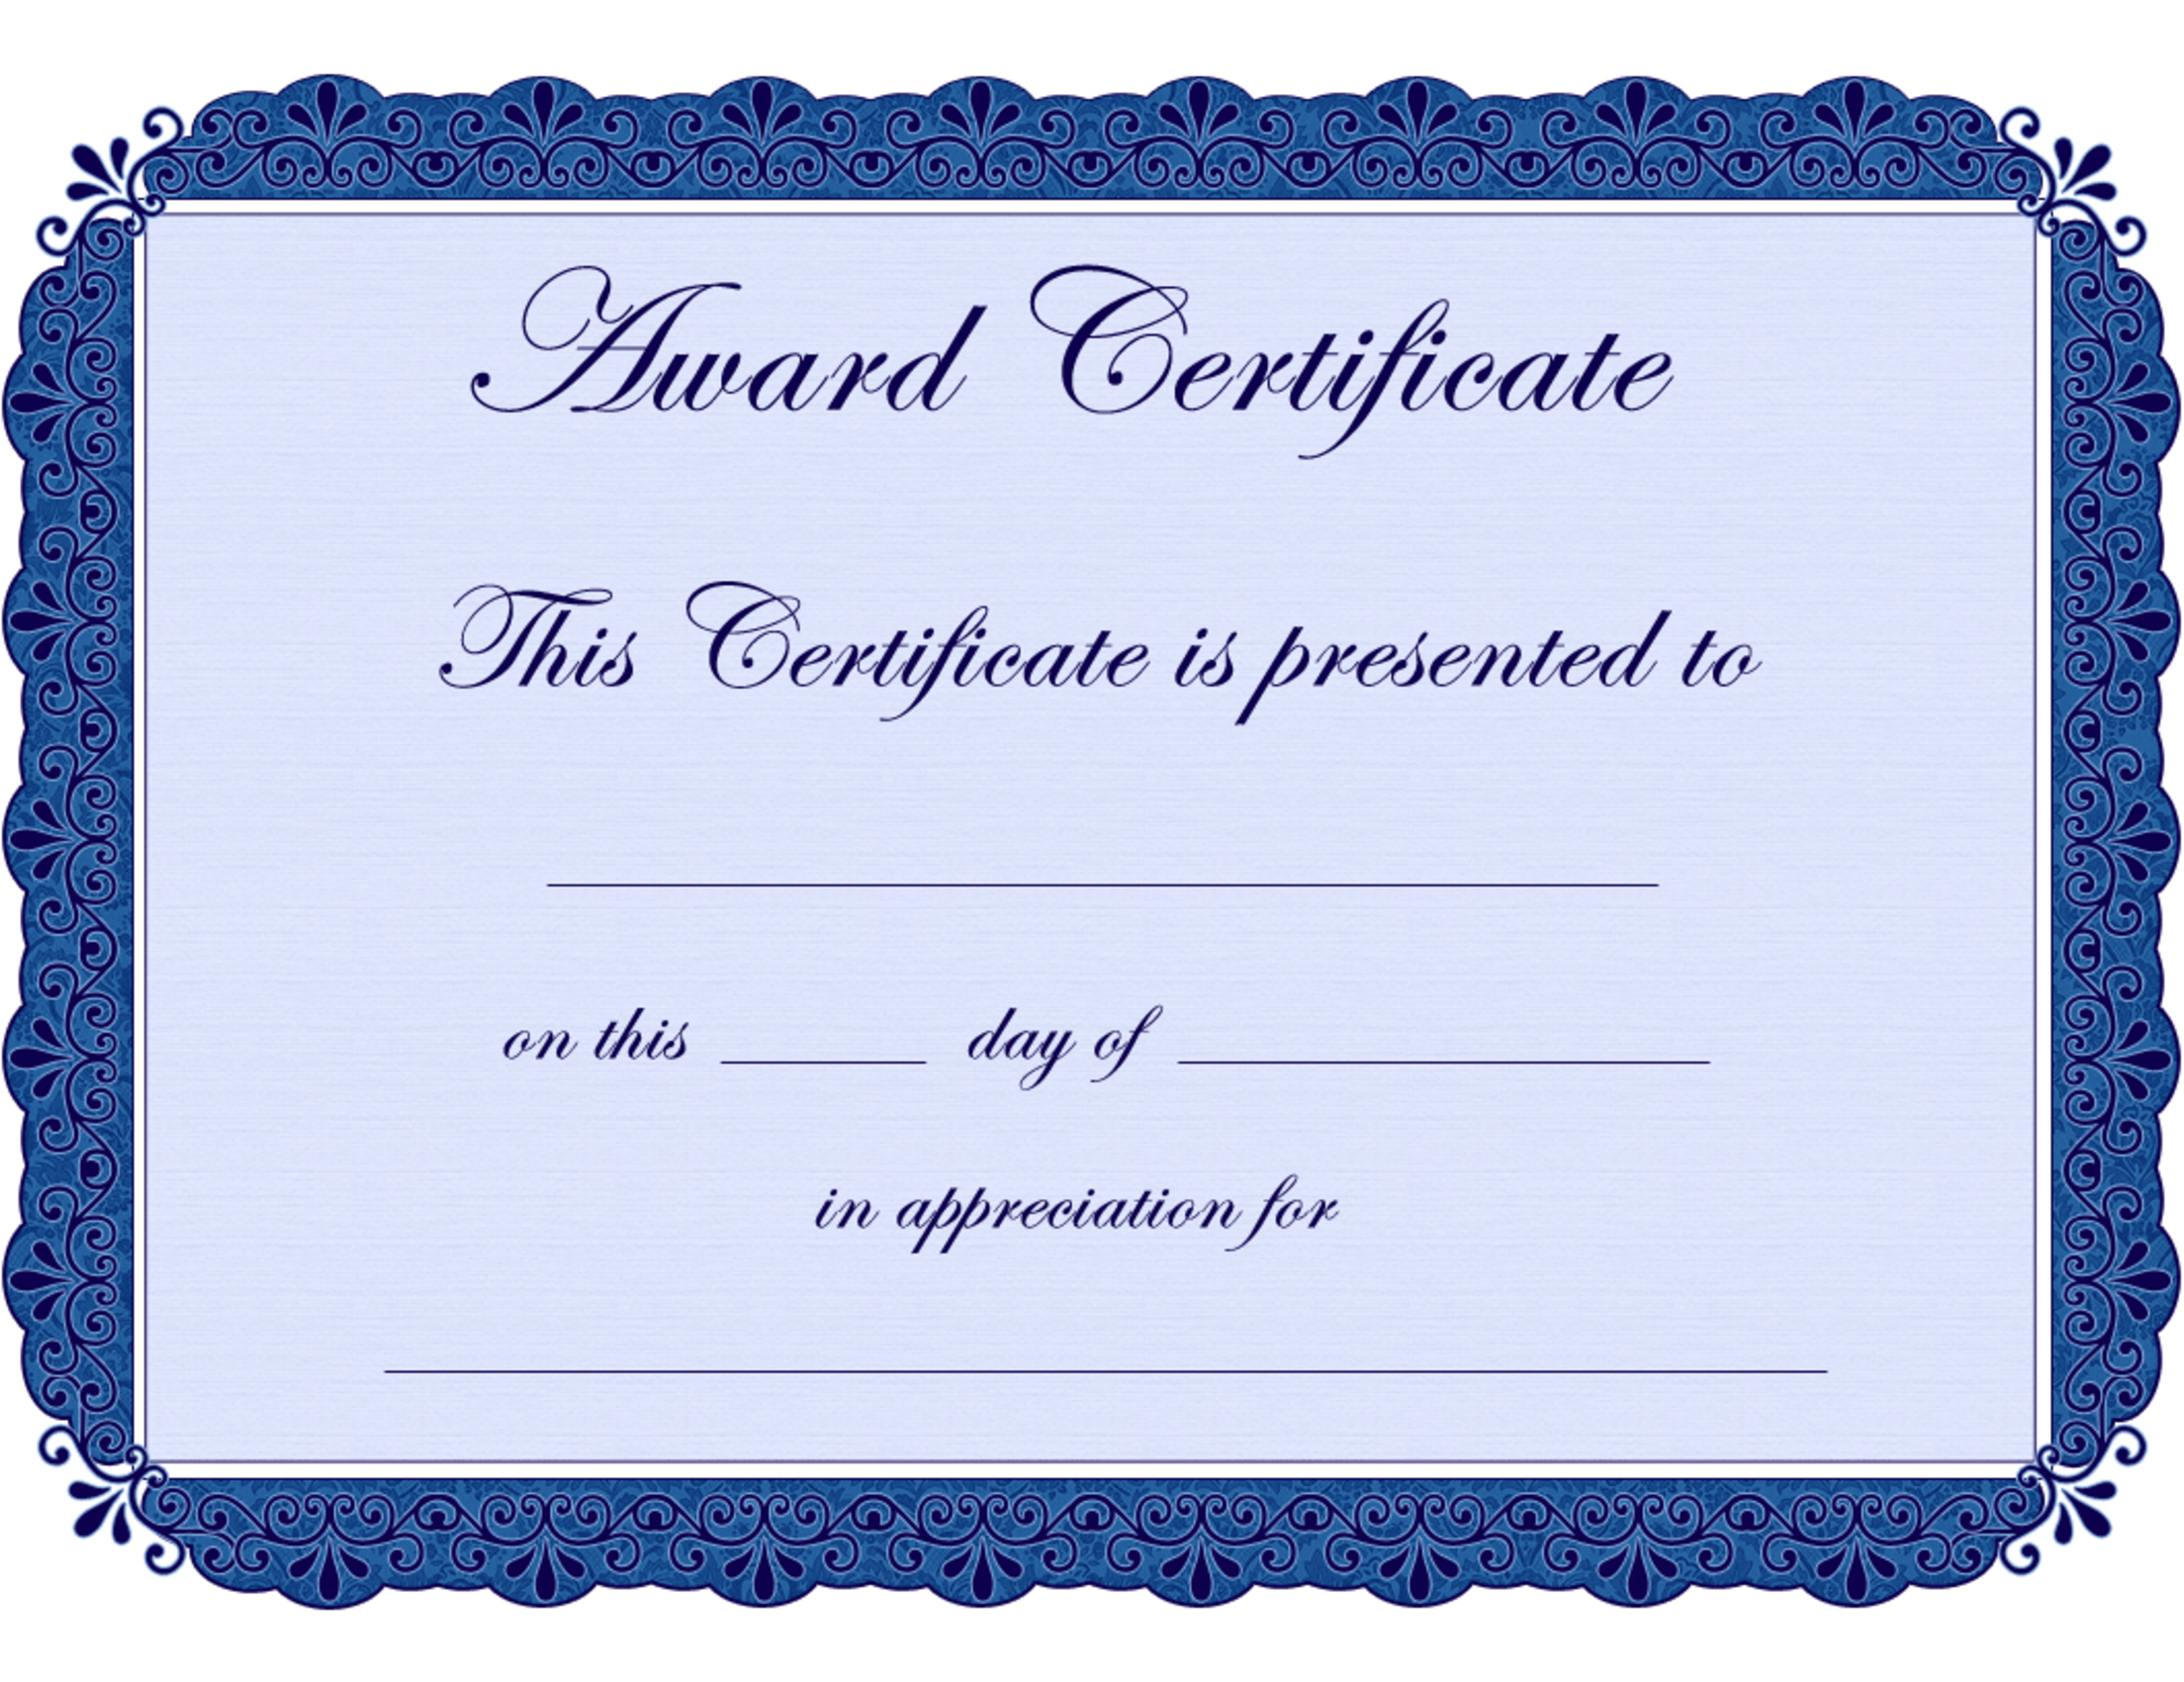 Free Printable Award Certificate Borders |  Award Inside Free Funny Award Certificate Templates For Word